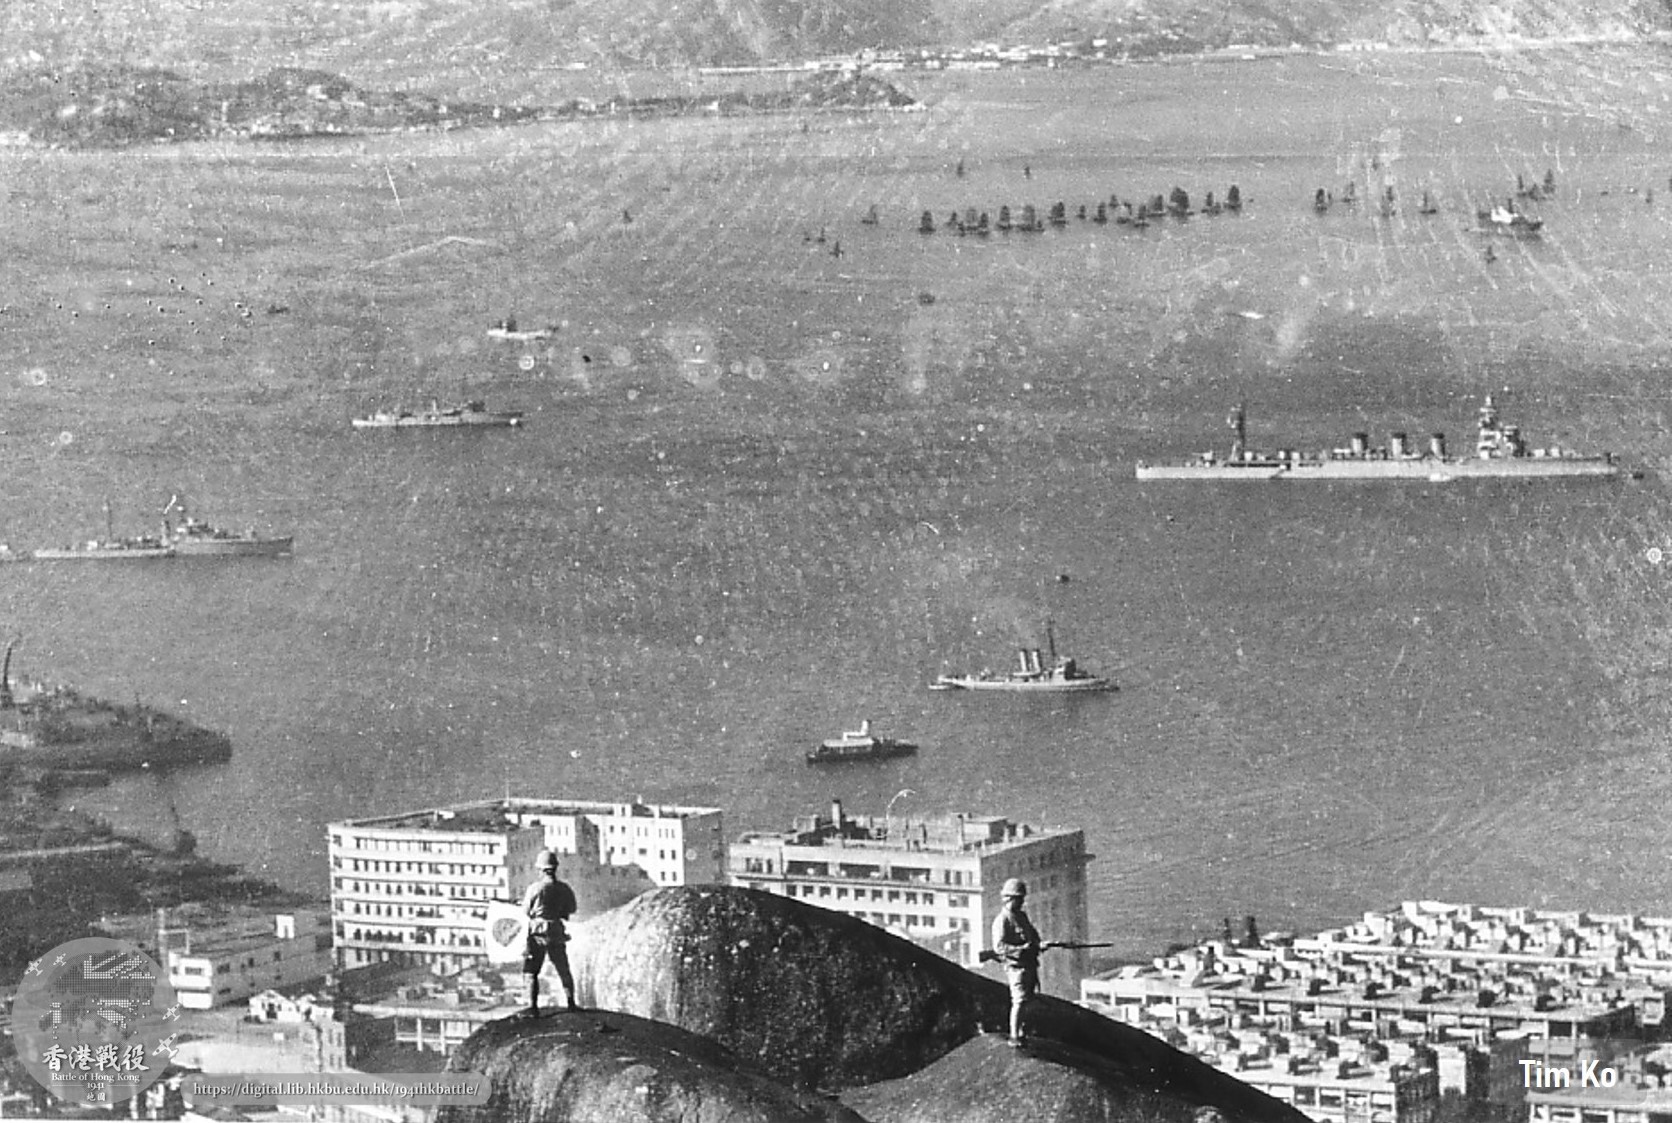 The Battle of Hong Kong 1941: A Spatial History Project